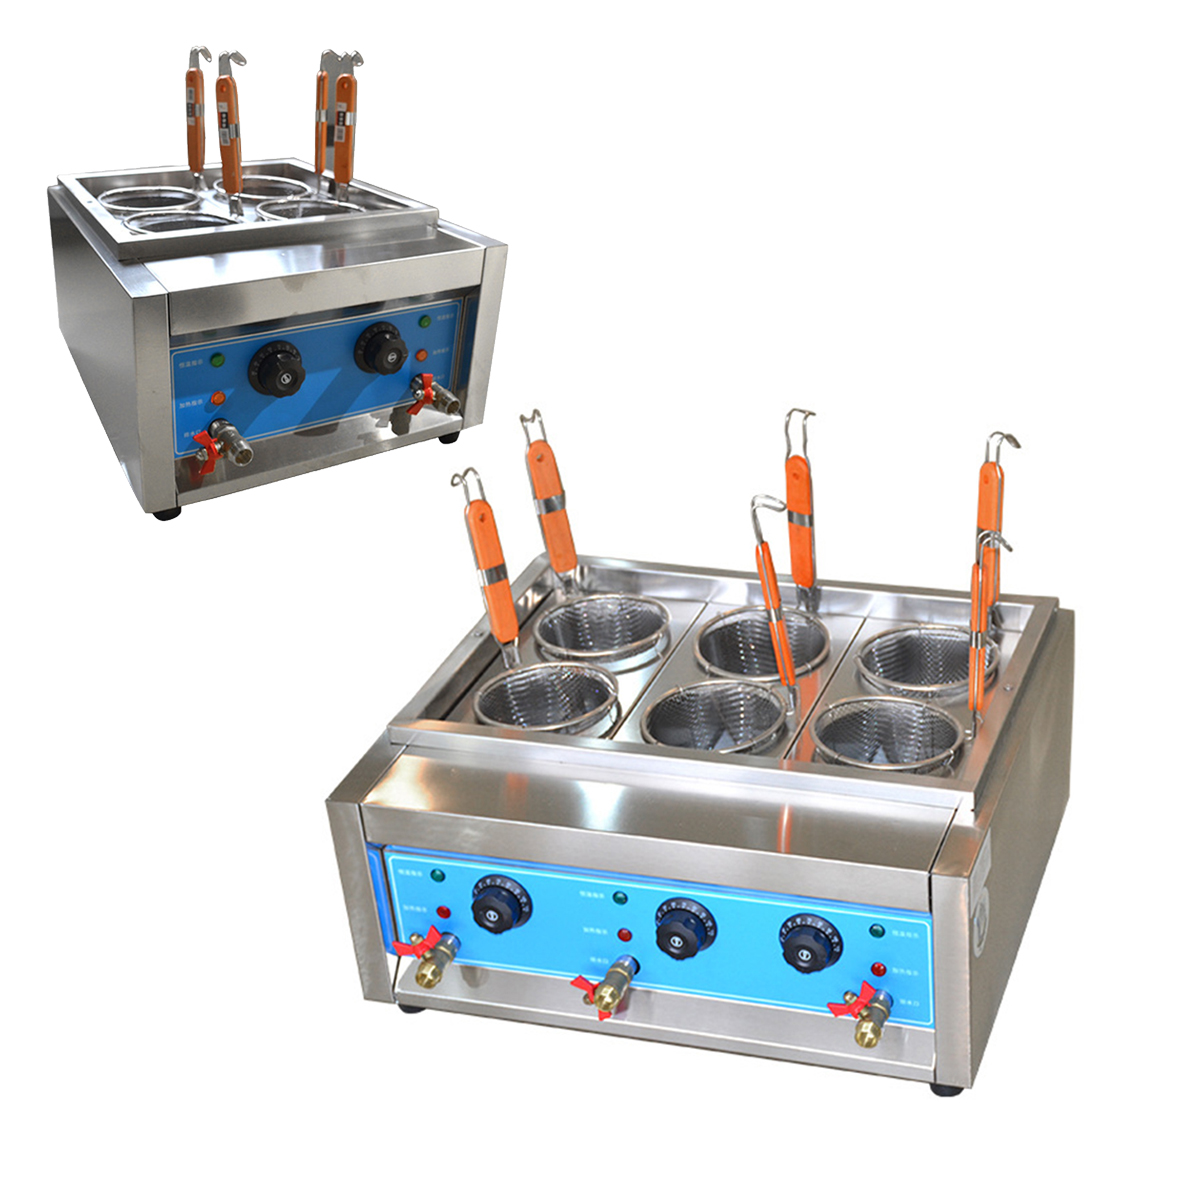 Commercial-4kw6kw-Table-Top-46-Baskets-Electric-Noodles-CookerPasta-Cooking-Machine-1402025